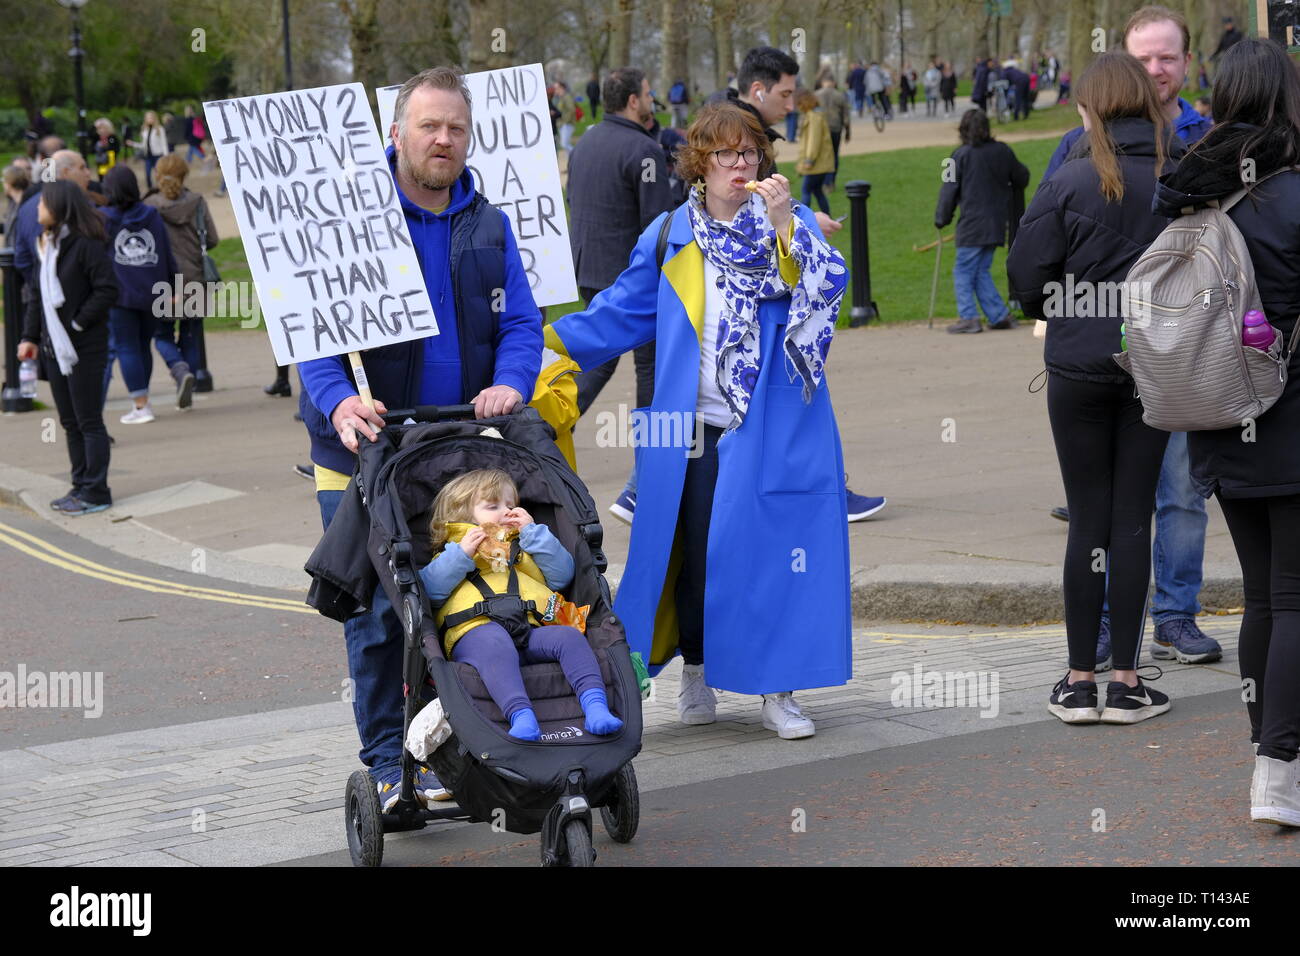 London, UK, 23rd March, 2019. Protesters demand that any Brexit is put to a people’s vote  Credit: Martin Kelly/Alamy Live News. Stock Photo